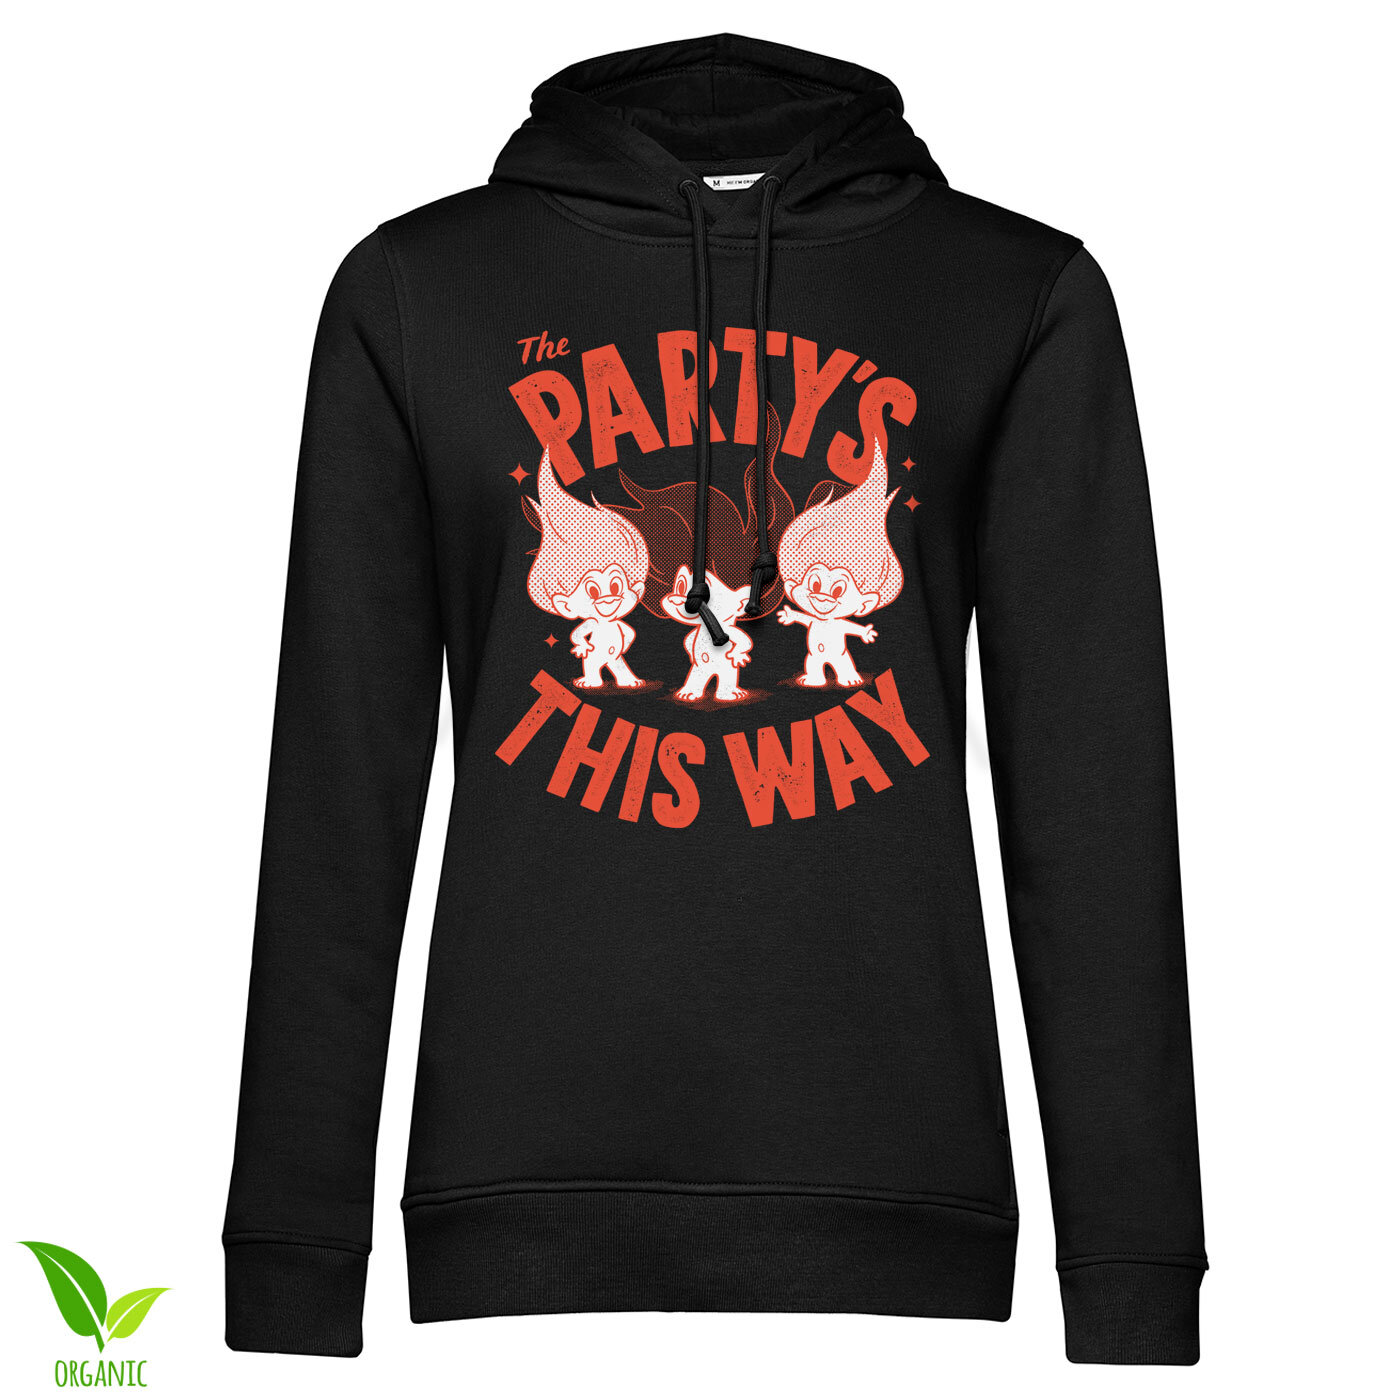 The Party's This Way Girls Hoodie